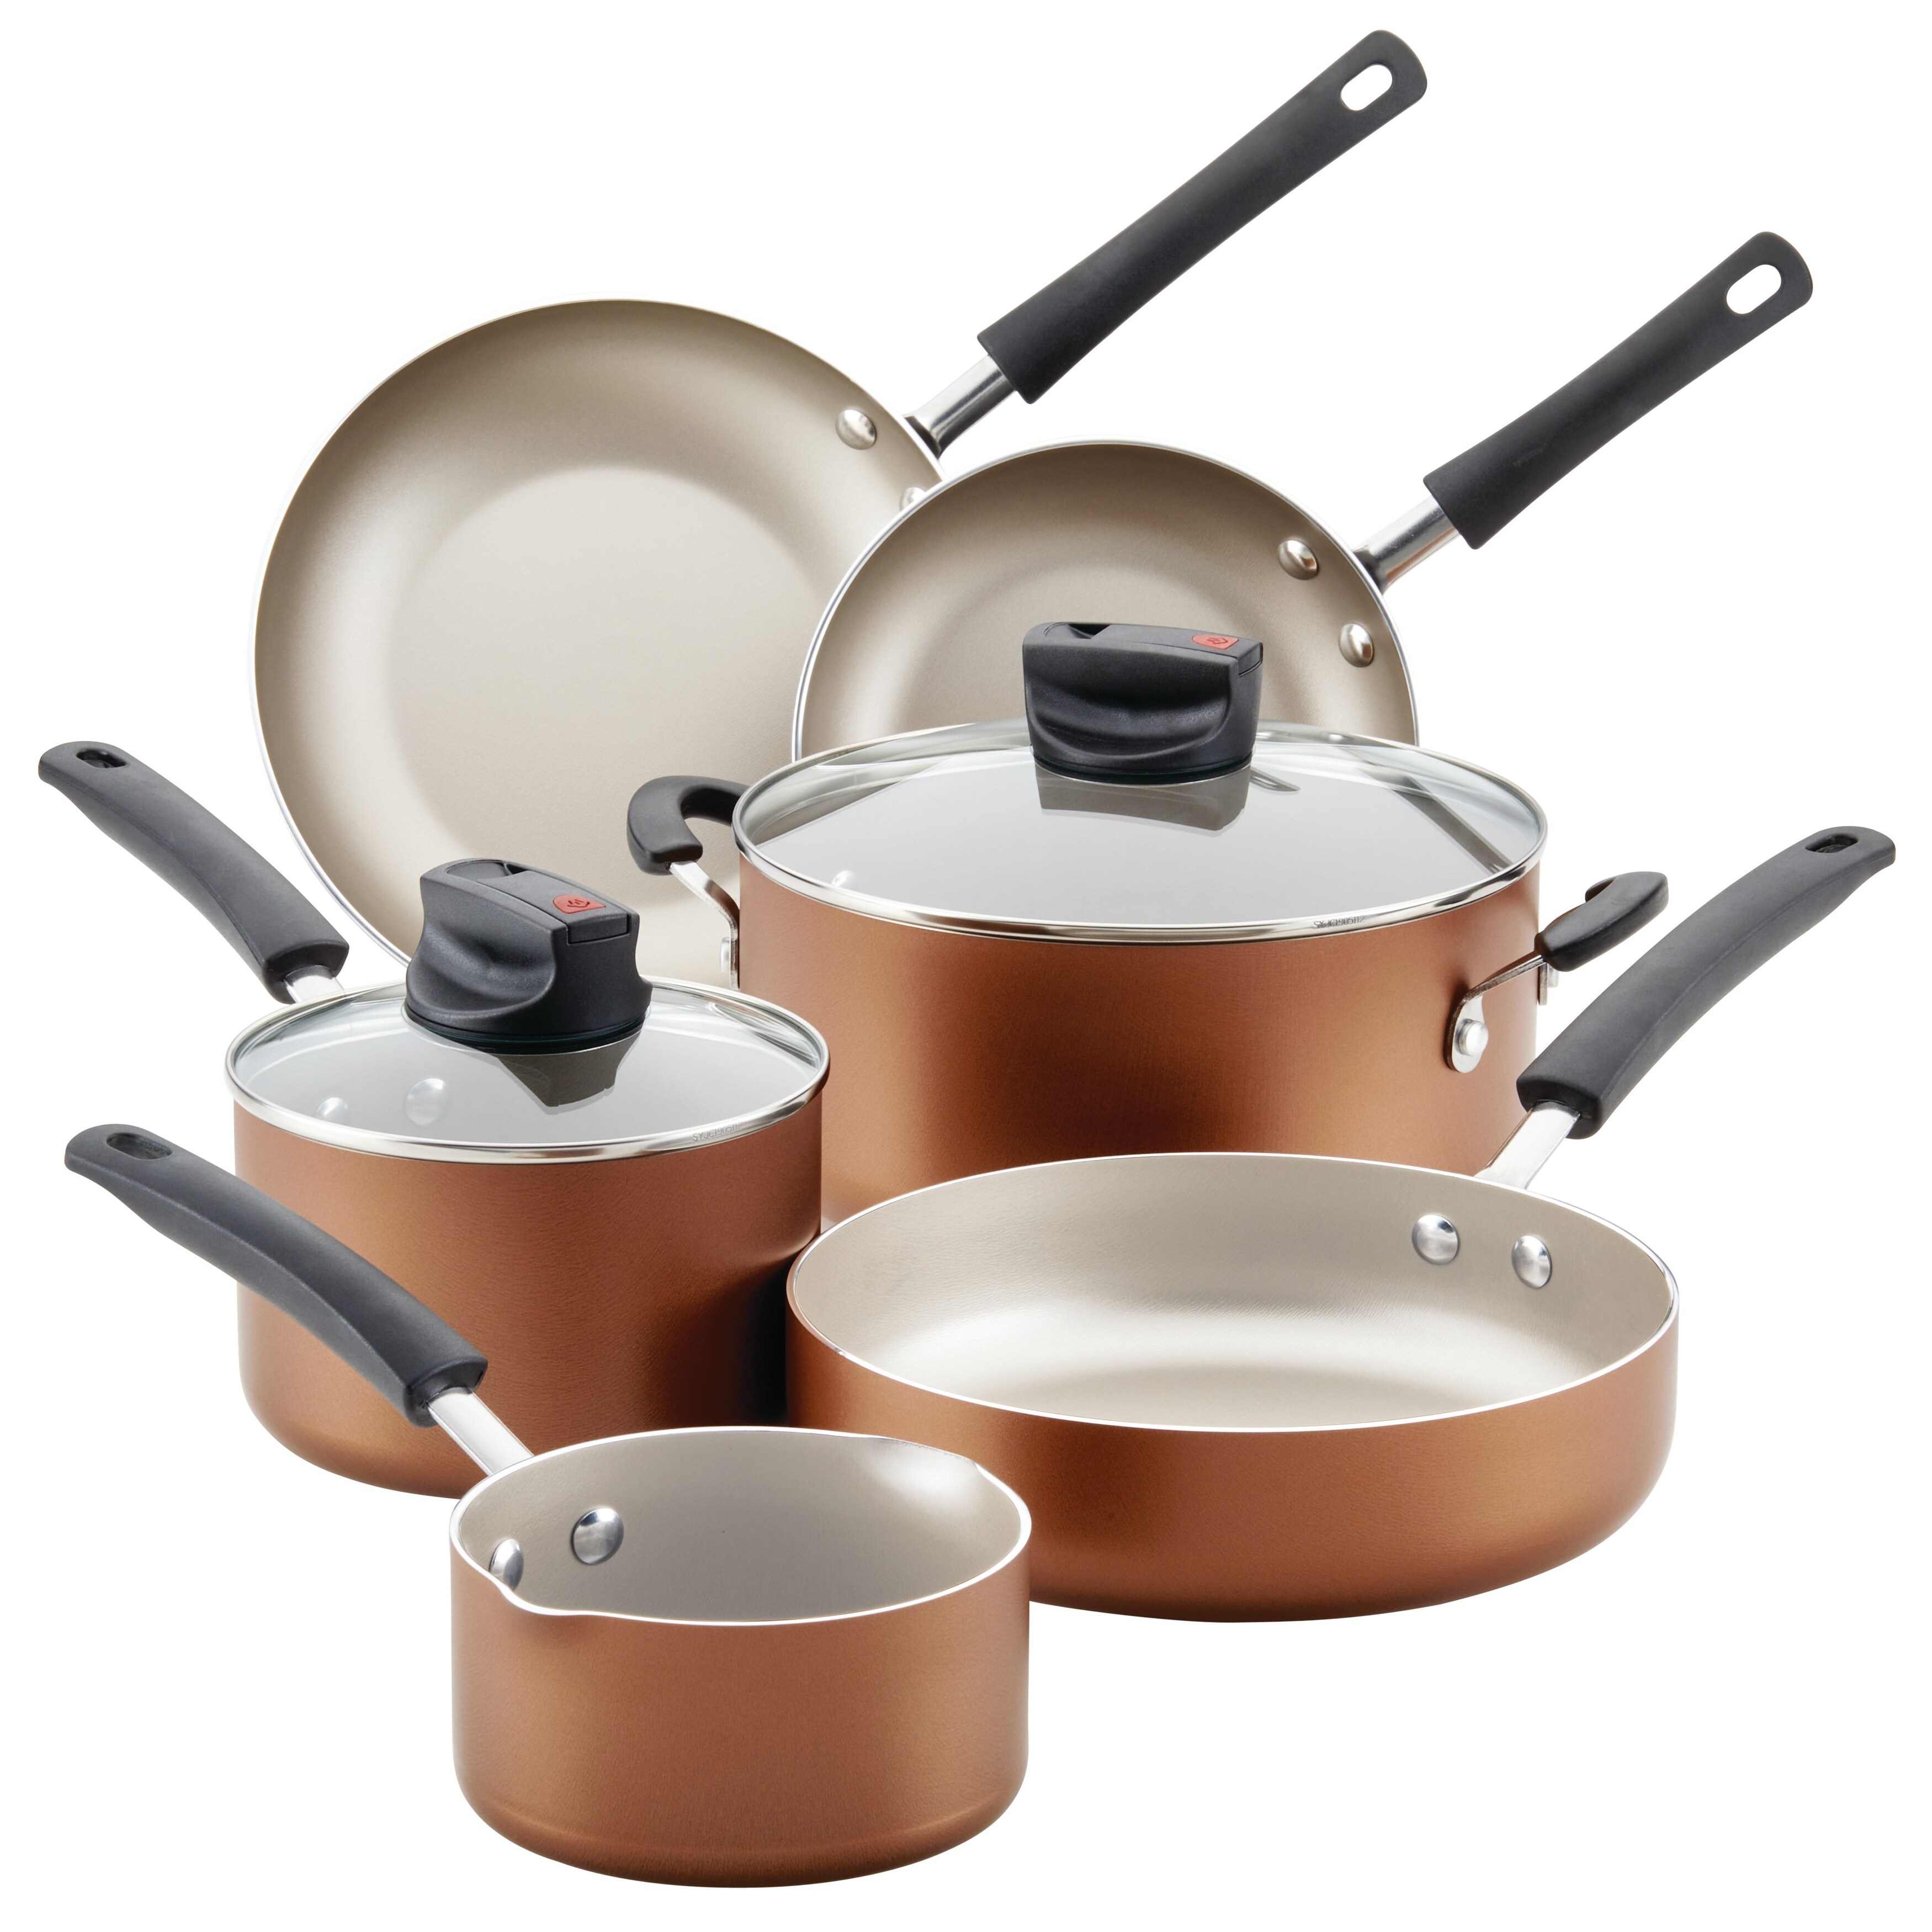 https://ak1.ostkcdn.com/images/products/is/images/direct/47a5eea833c4f1cc4aea4cbde9bff271412c952c/Easy-Clean-Steam-Vent-Cookware-Nonstick-Pots-and-Pans-Set%2C-14-Piece.jpg